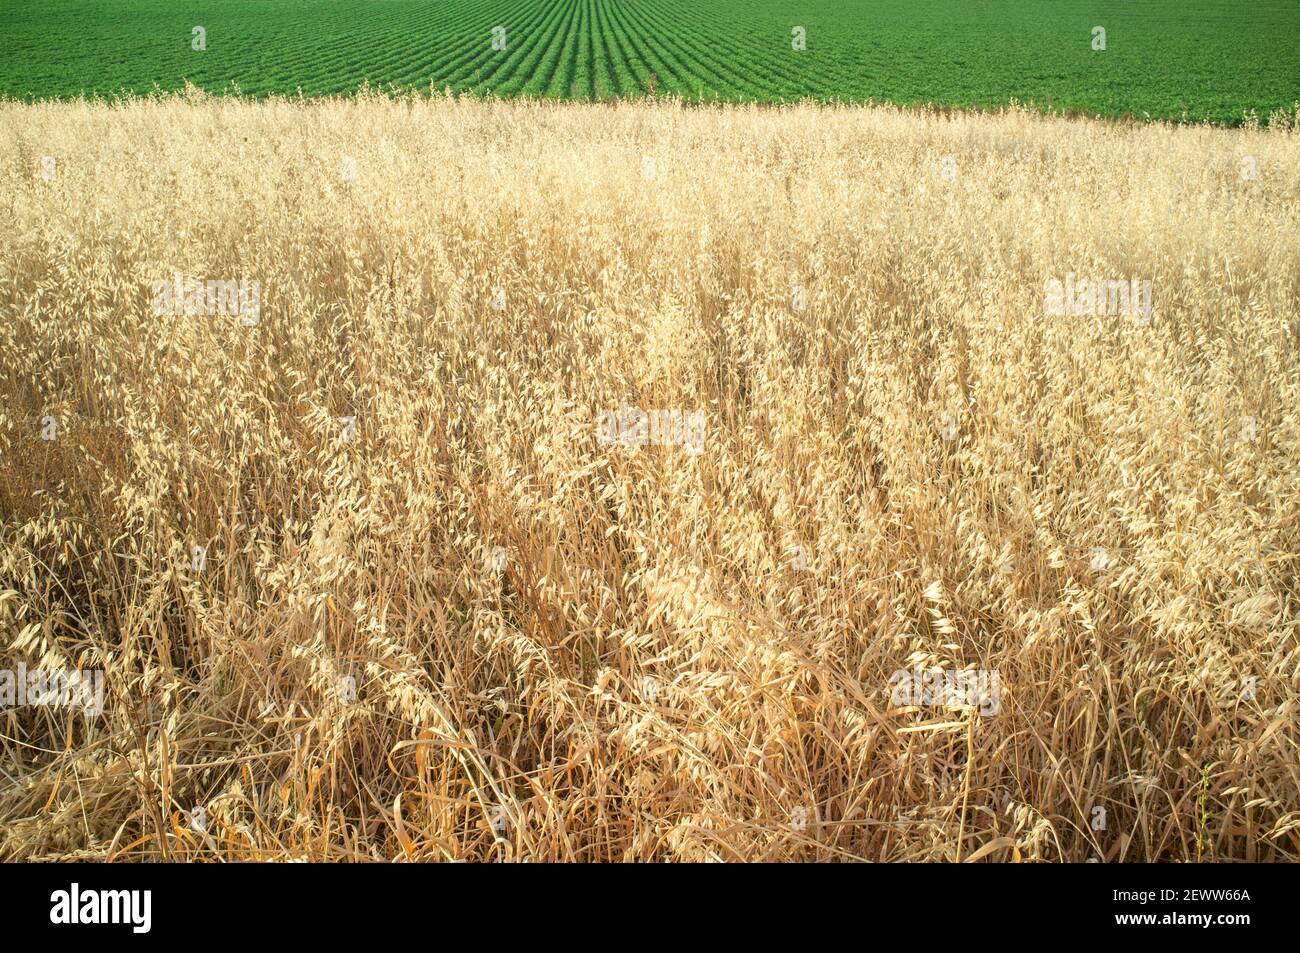 Grain field close to tomatoes crop land. Irrigated agriculture versus non-irrigated concept Stock Photo